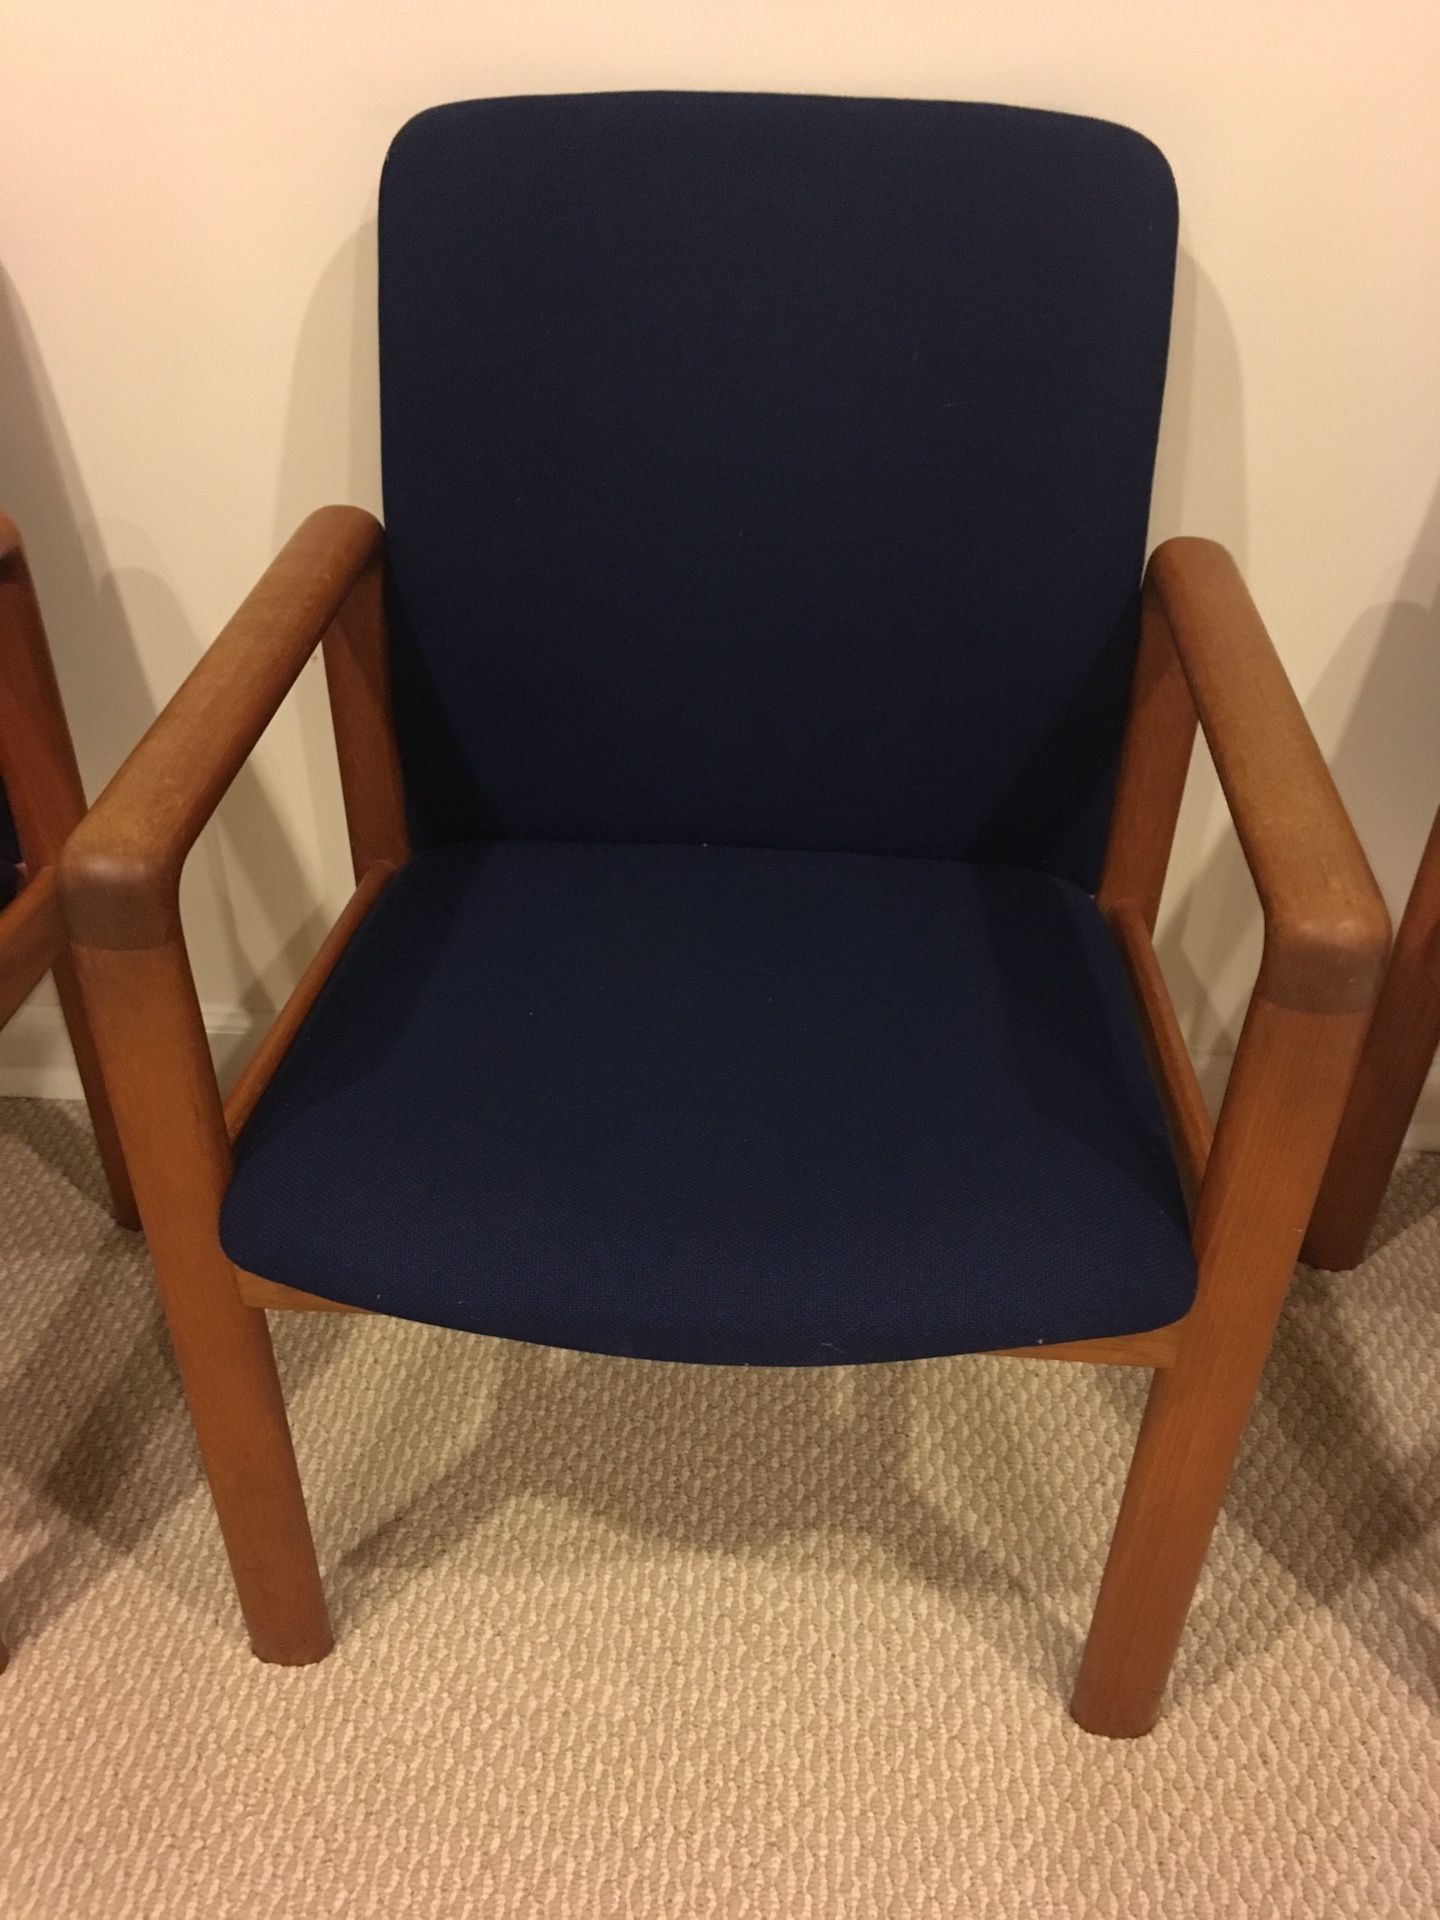 Chairs, sofa, tv stand, table (Free!!) (pending pick up)